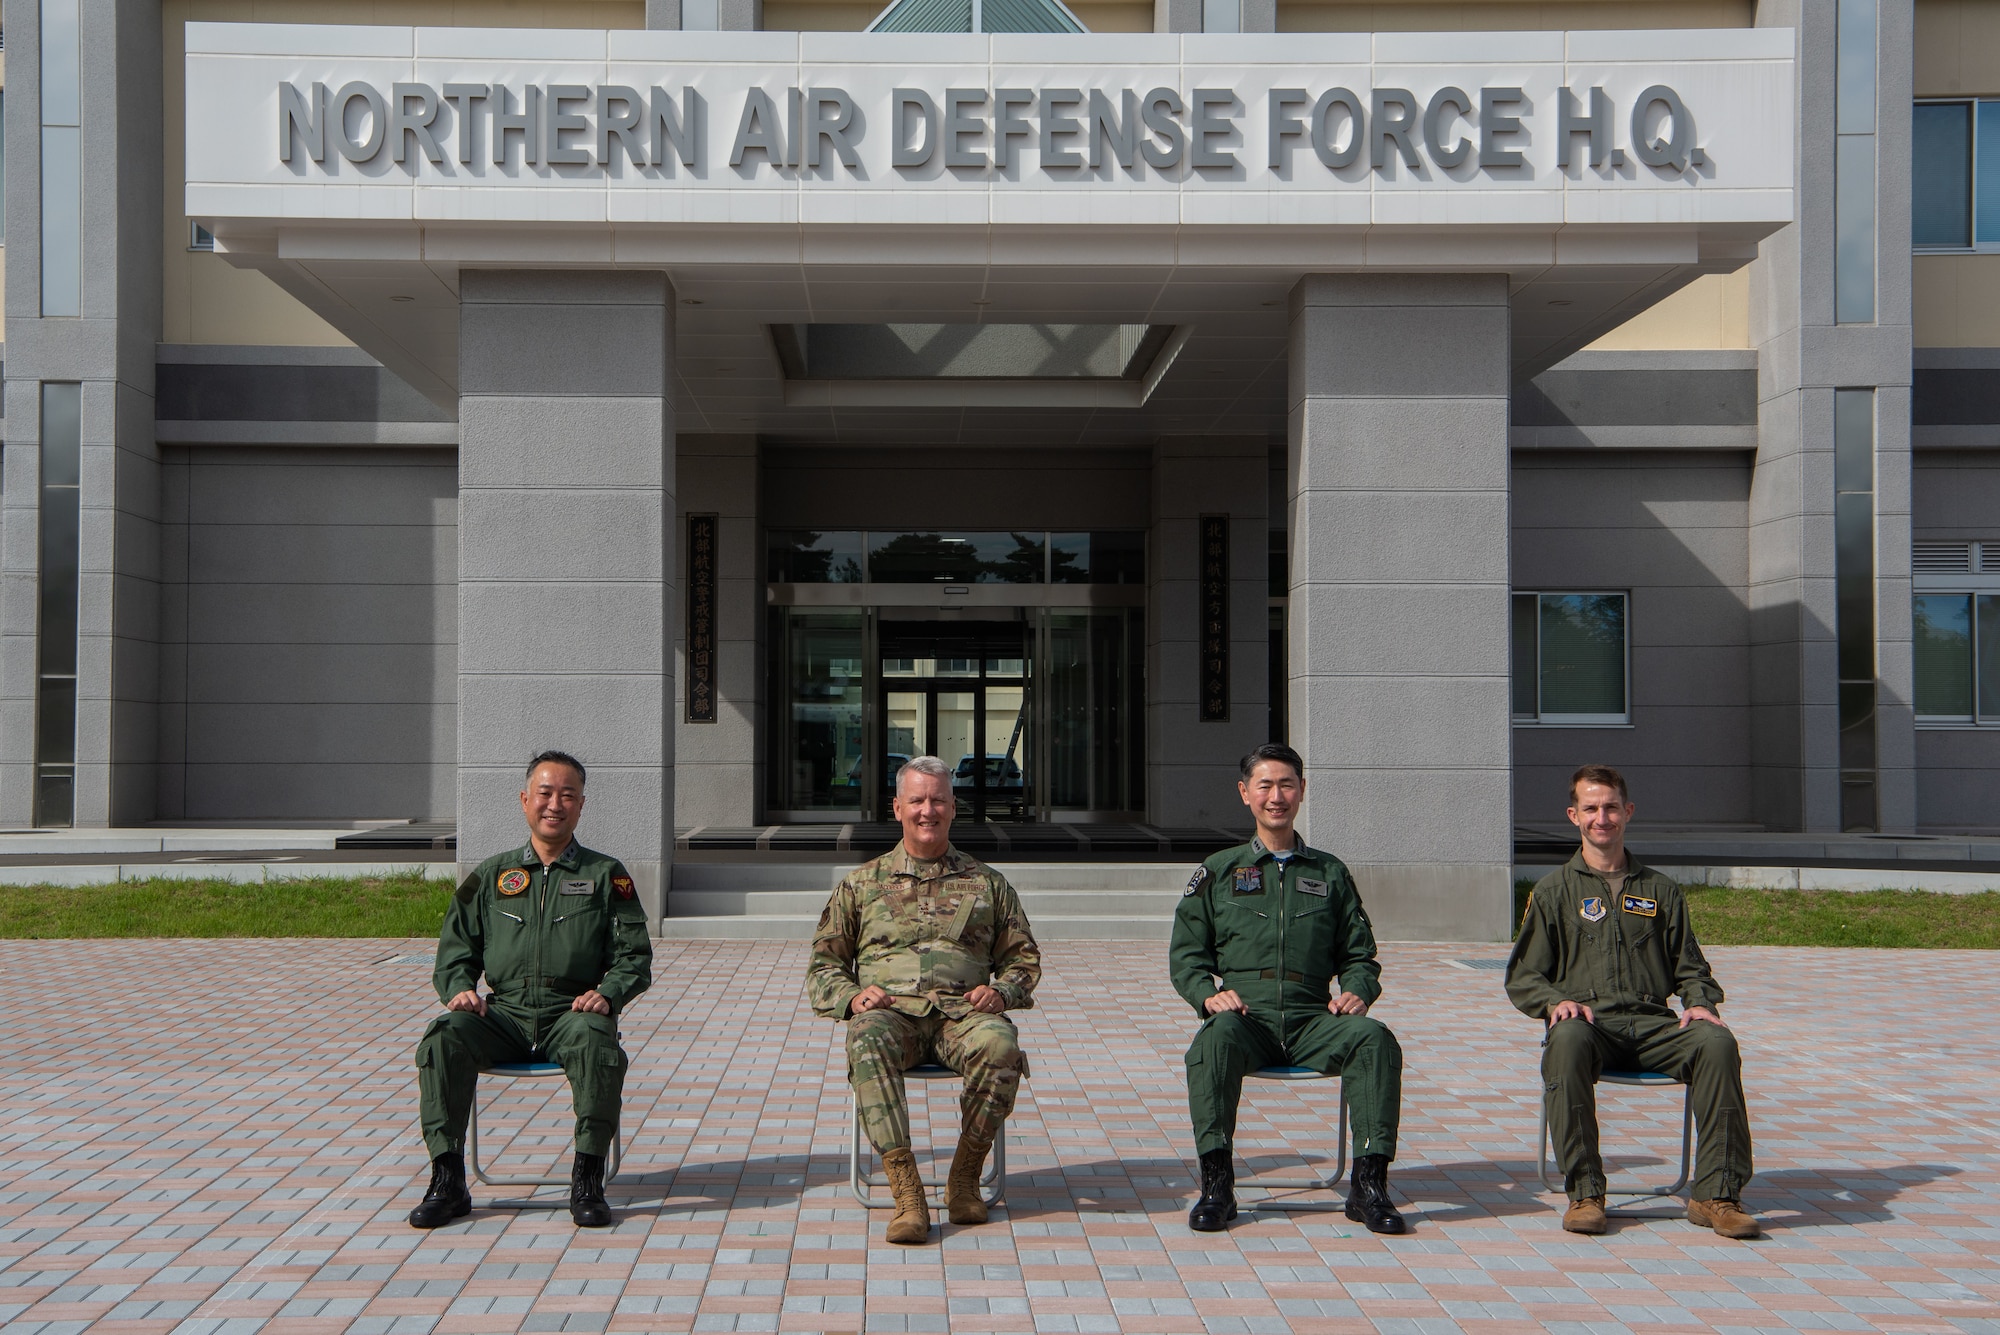 U.S. and Japanese military members sit alongside each other in front of a "Northern Air Defense Force H.Q." sign.